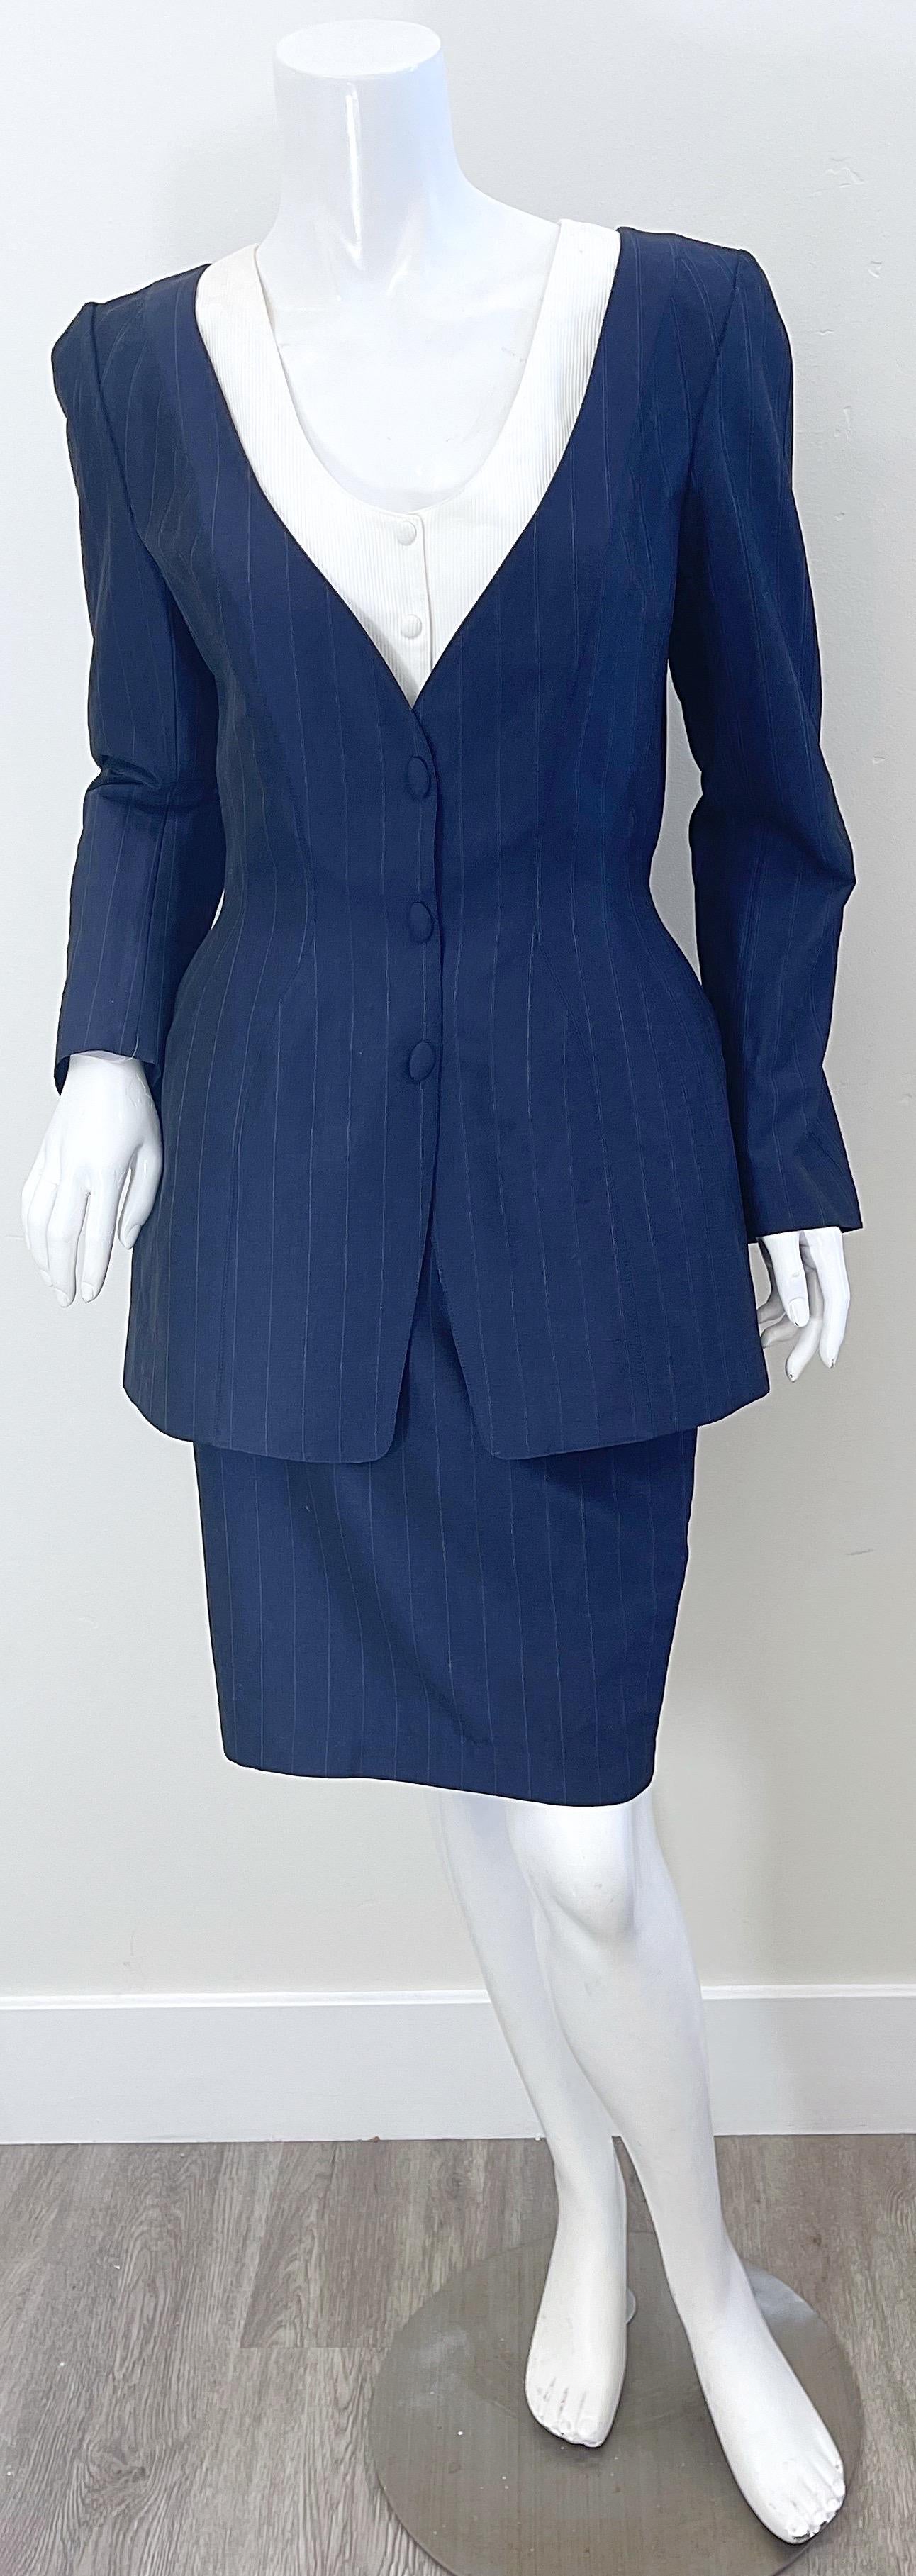 Chic brand new with original store tags early 90s THIERRY MUGLER navy blue and white pinstriped skirt suit ! This power suit features a tailored blazer features mock buttons with hidden snaps up the front. High waisted pencil skirt has hidden zipper